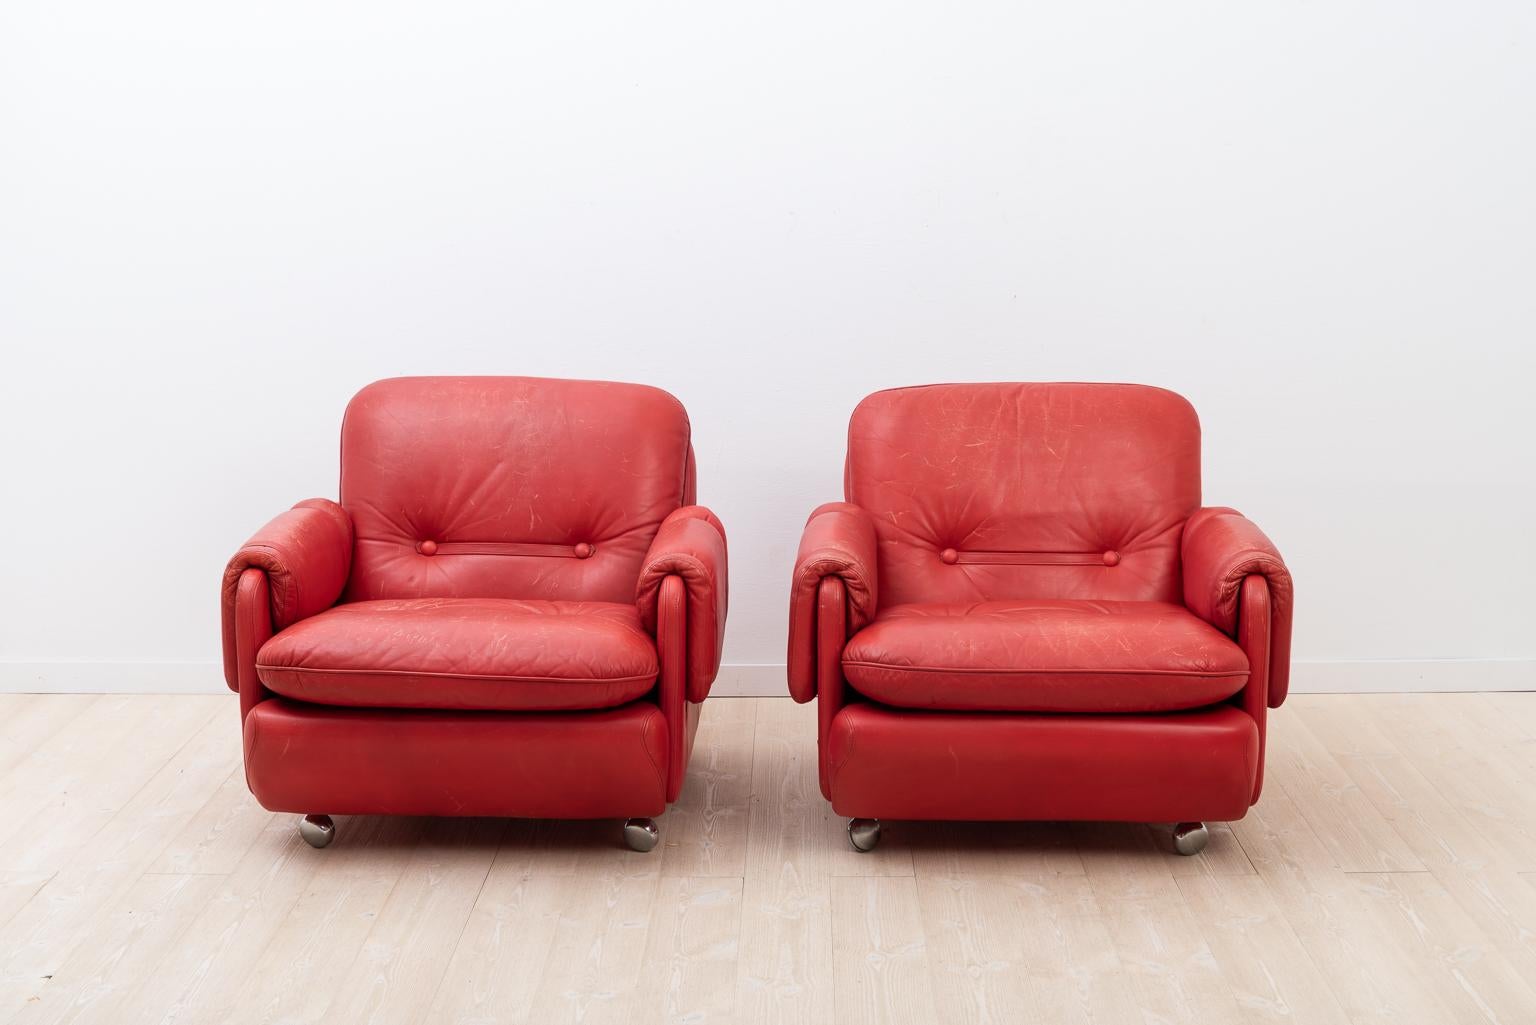 Lombardia red leather armchairs designed by Risto Holme for IKEA. Manufactured during the 20th century in Sweden. Caster wheels in chrome. The seats have some minor wear and loss of color.